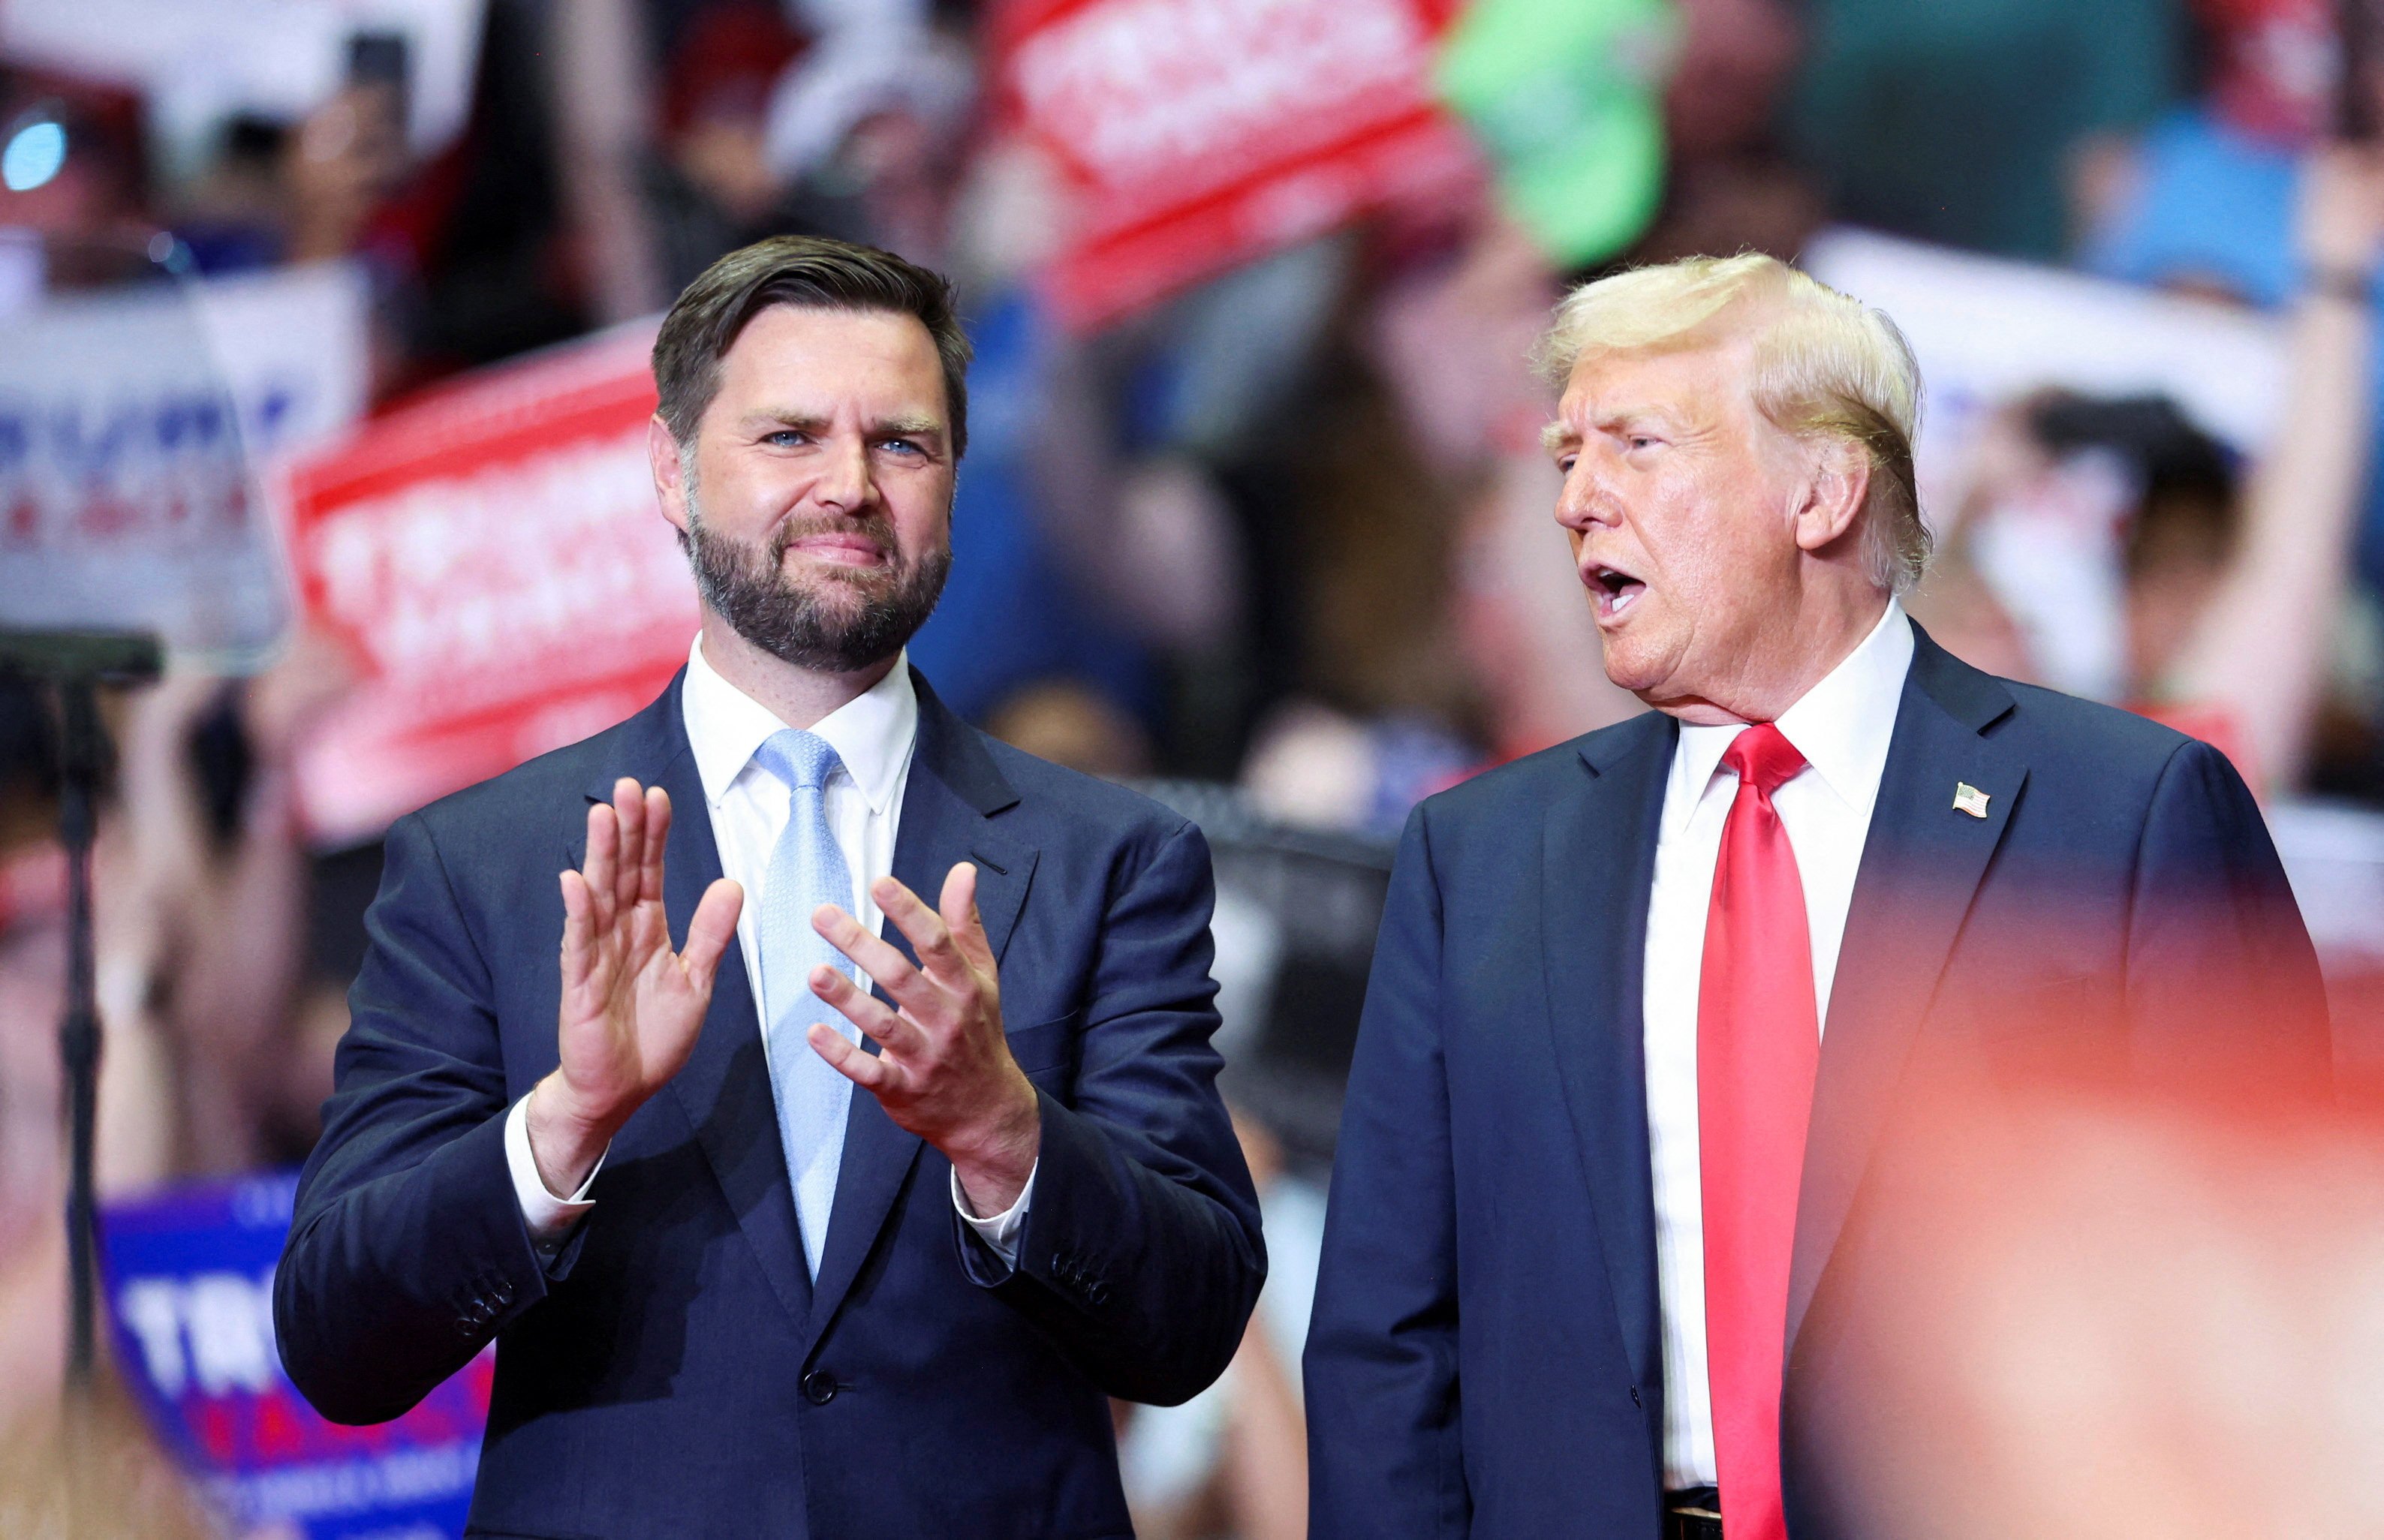 J.D. Vance (left) should learn from Mike Pence to be quiet and leave the limelight to Donald Trump, political scientist Li Cheng says. Photo: Reuters